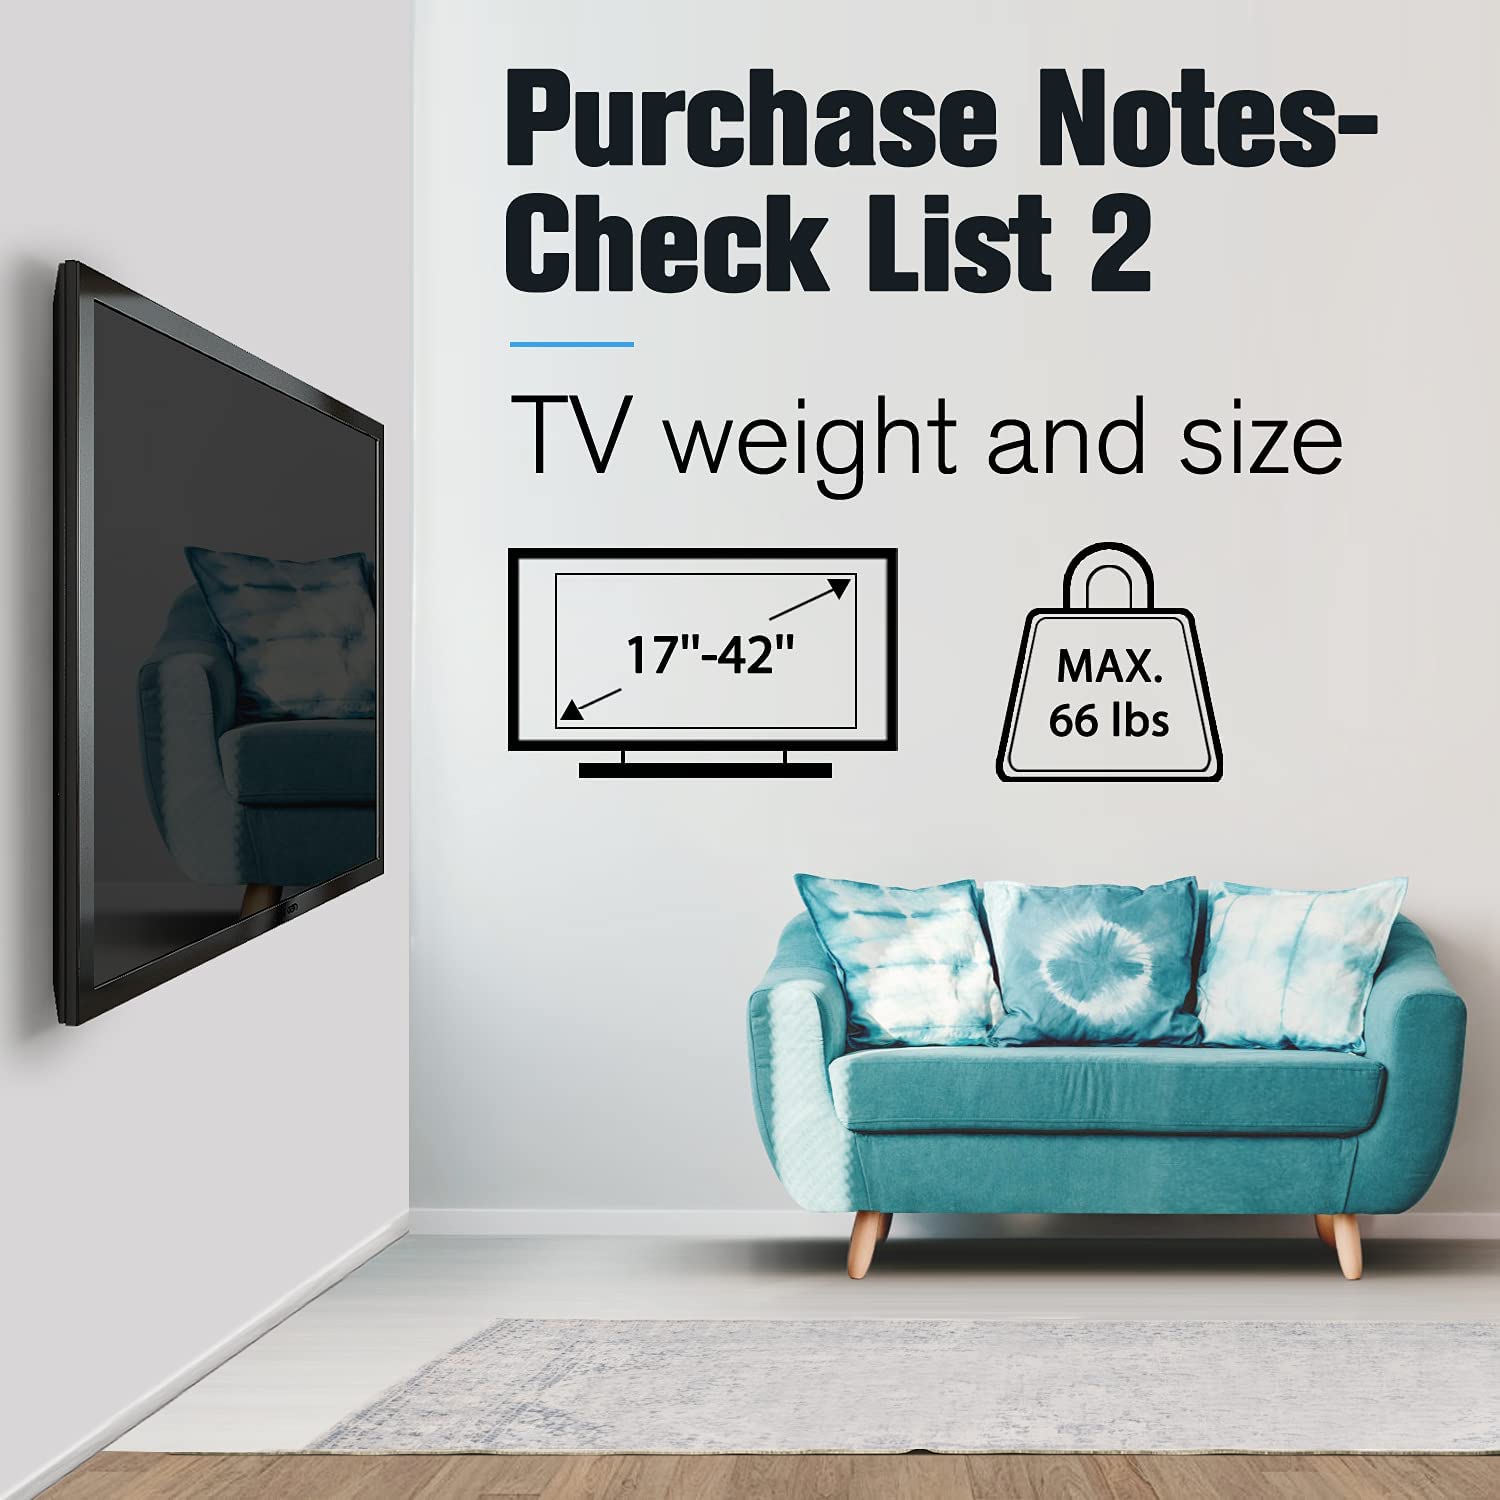 tv hanger works with 17''-42'' TVs loading up to 66 lbs.